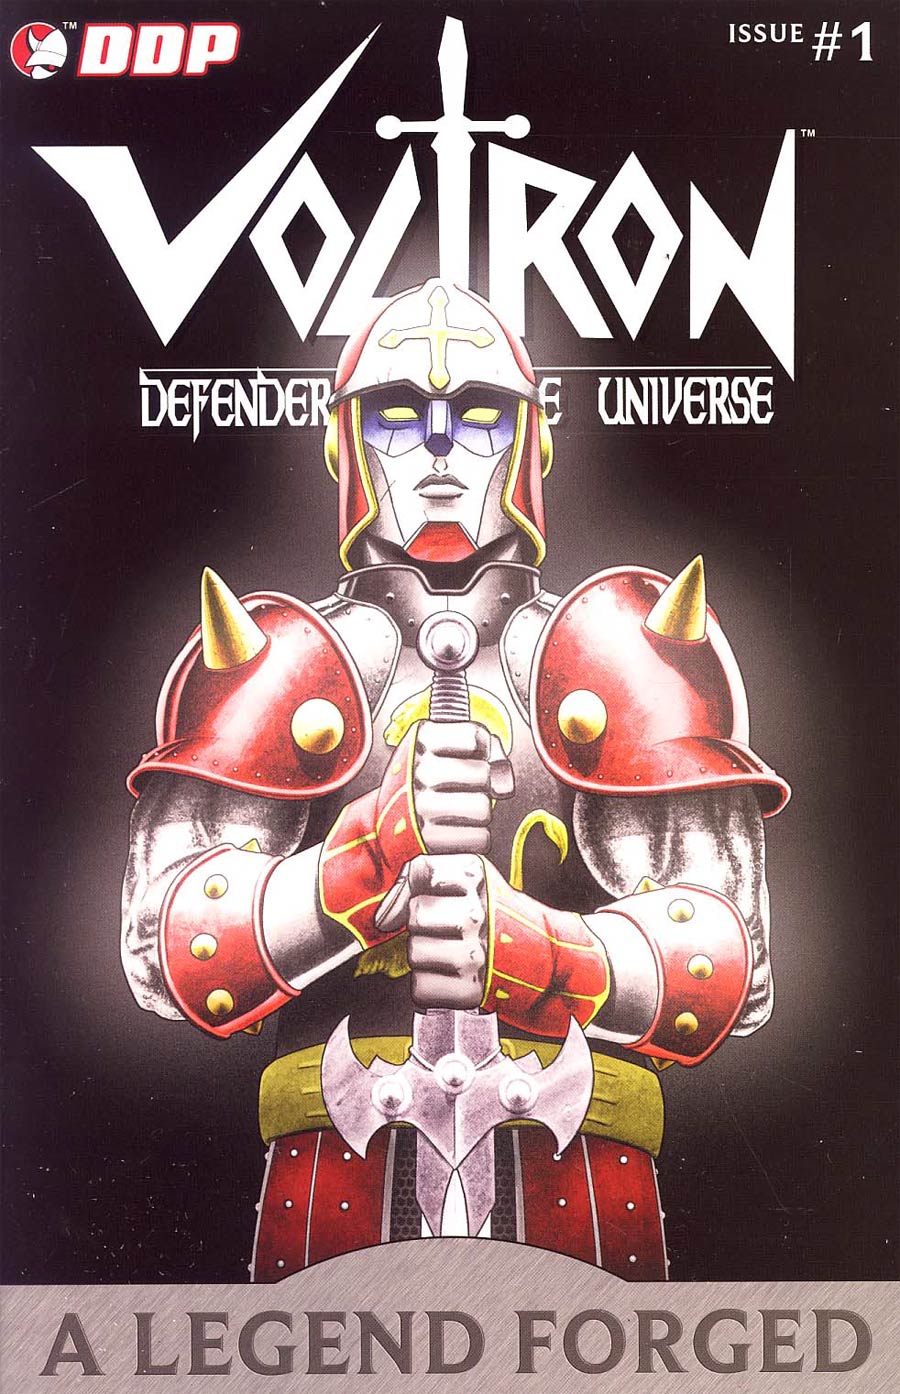 Voltron A Legend Forged #1 Cover A Tim Seeley